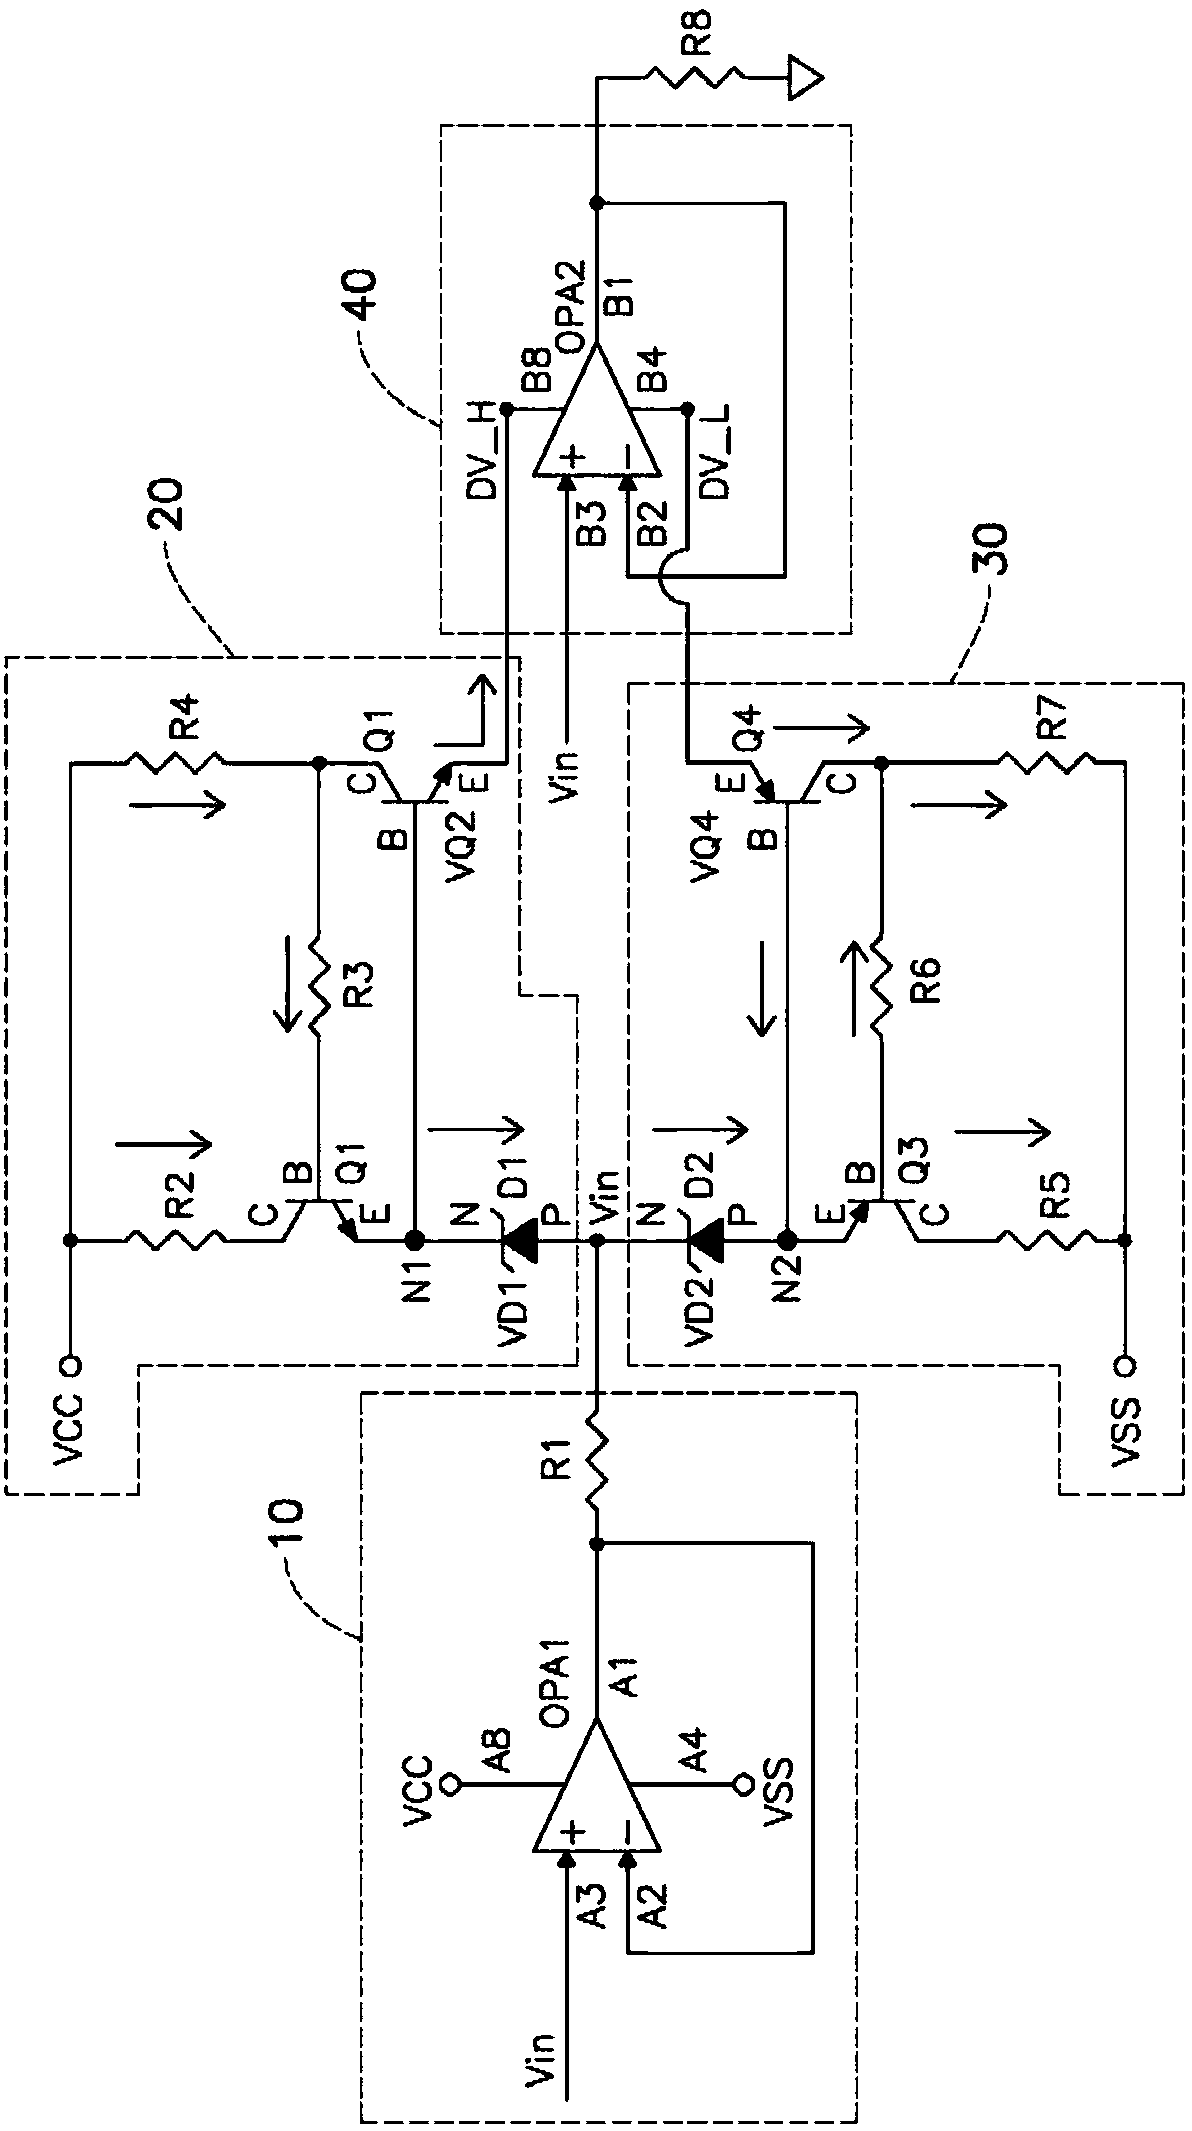 Dynamic power supply system capable of changing operating power with input signal